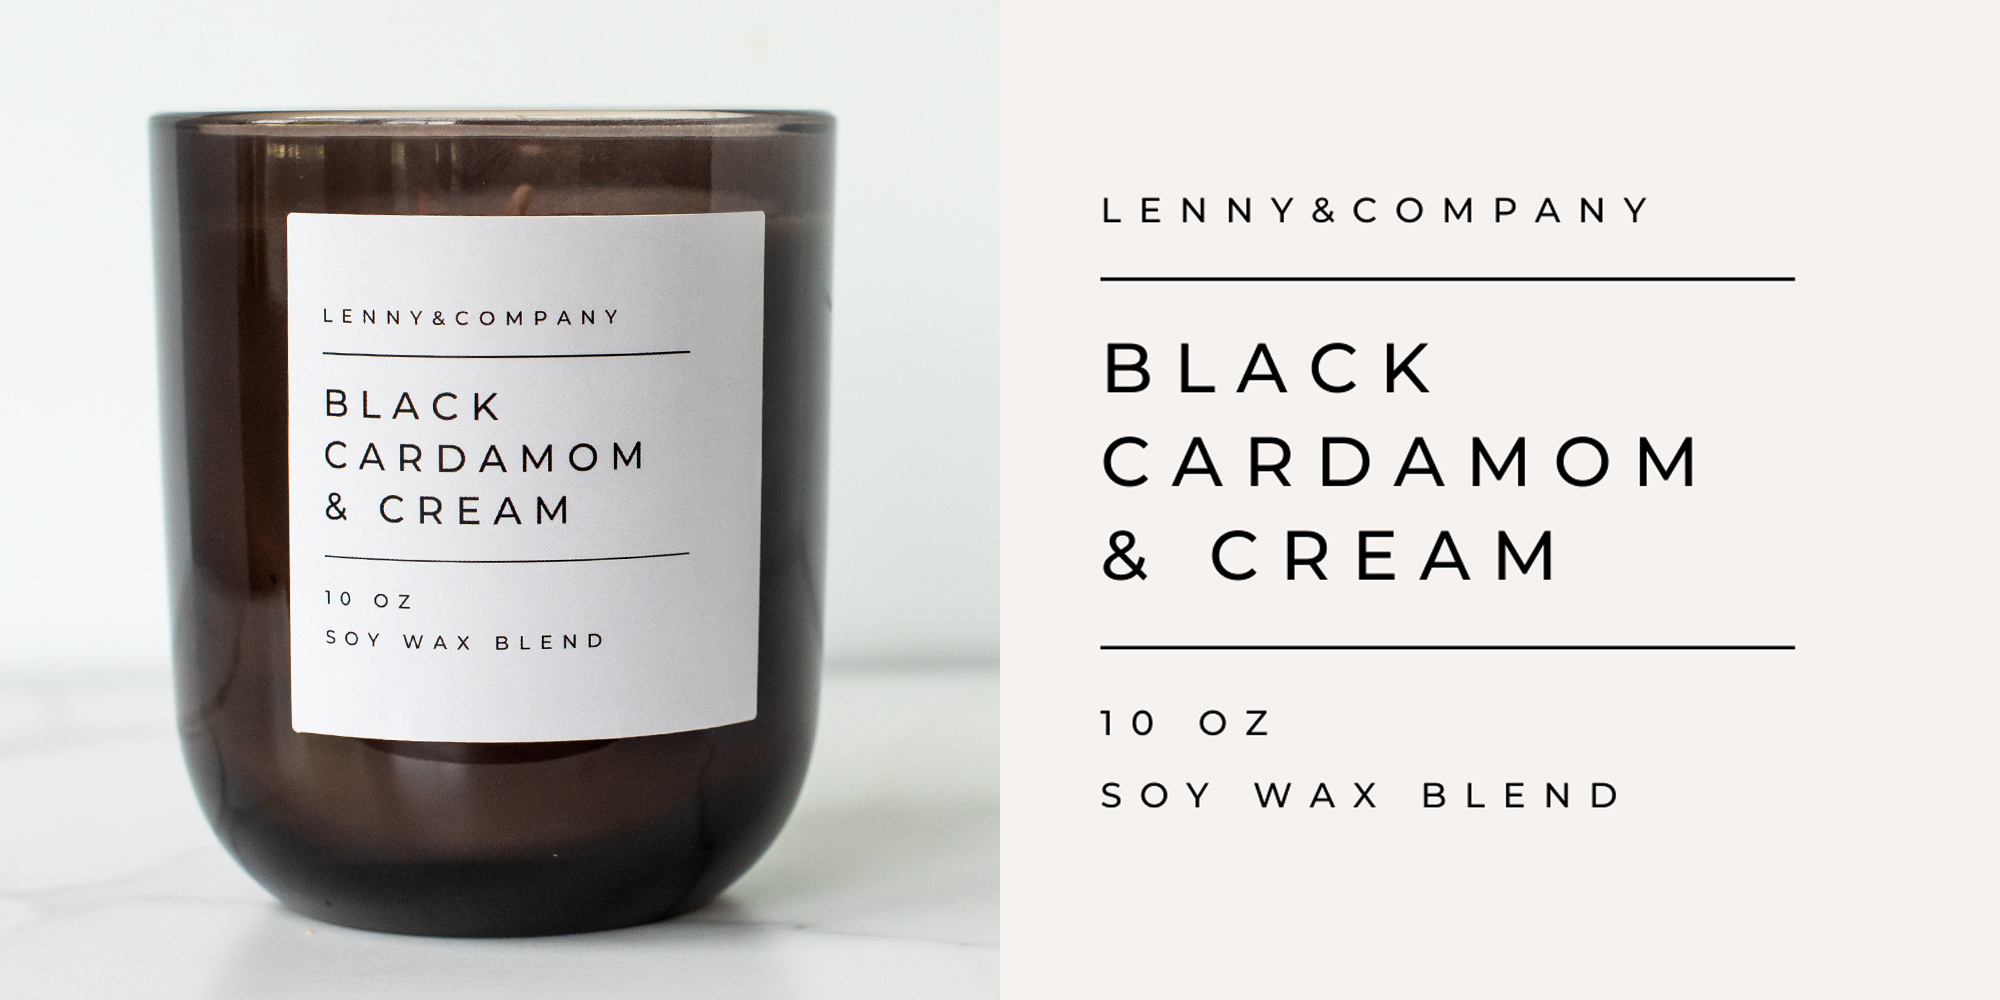 Black Cardamom and Cream fragrance oil candle and label.